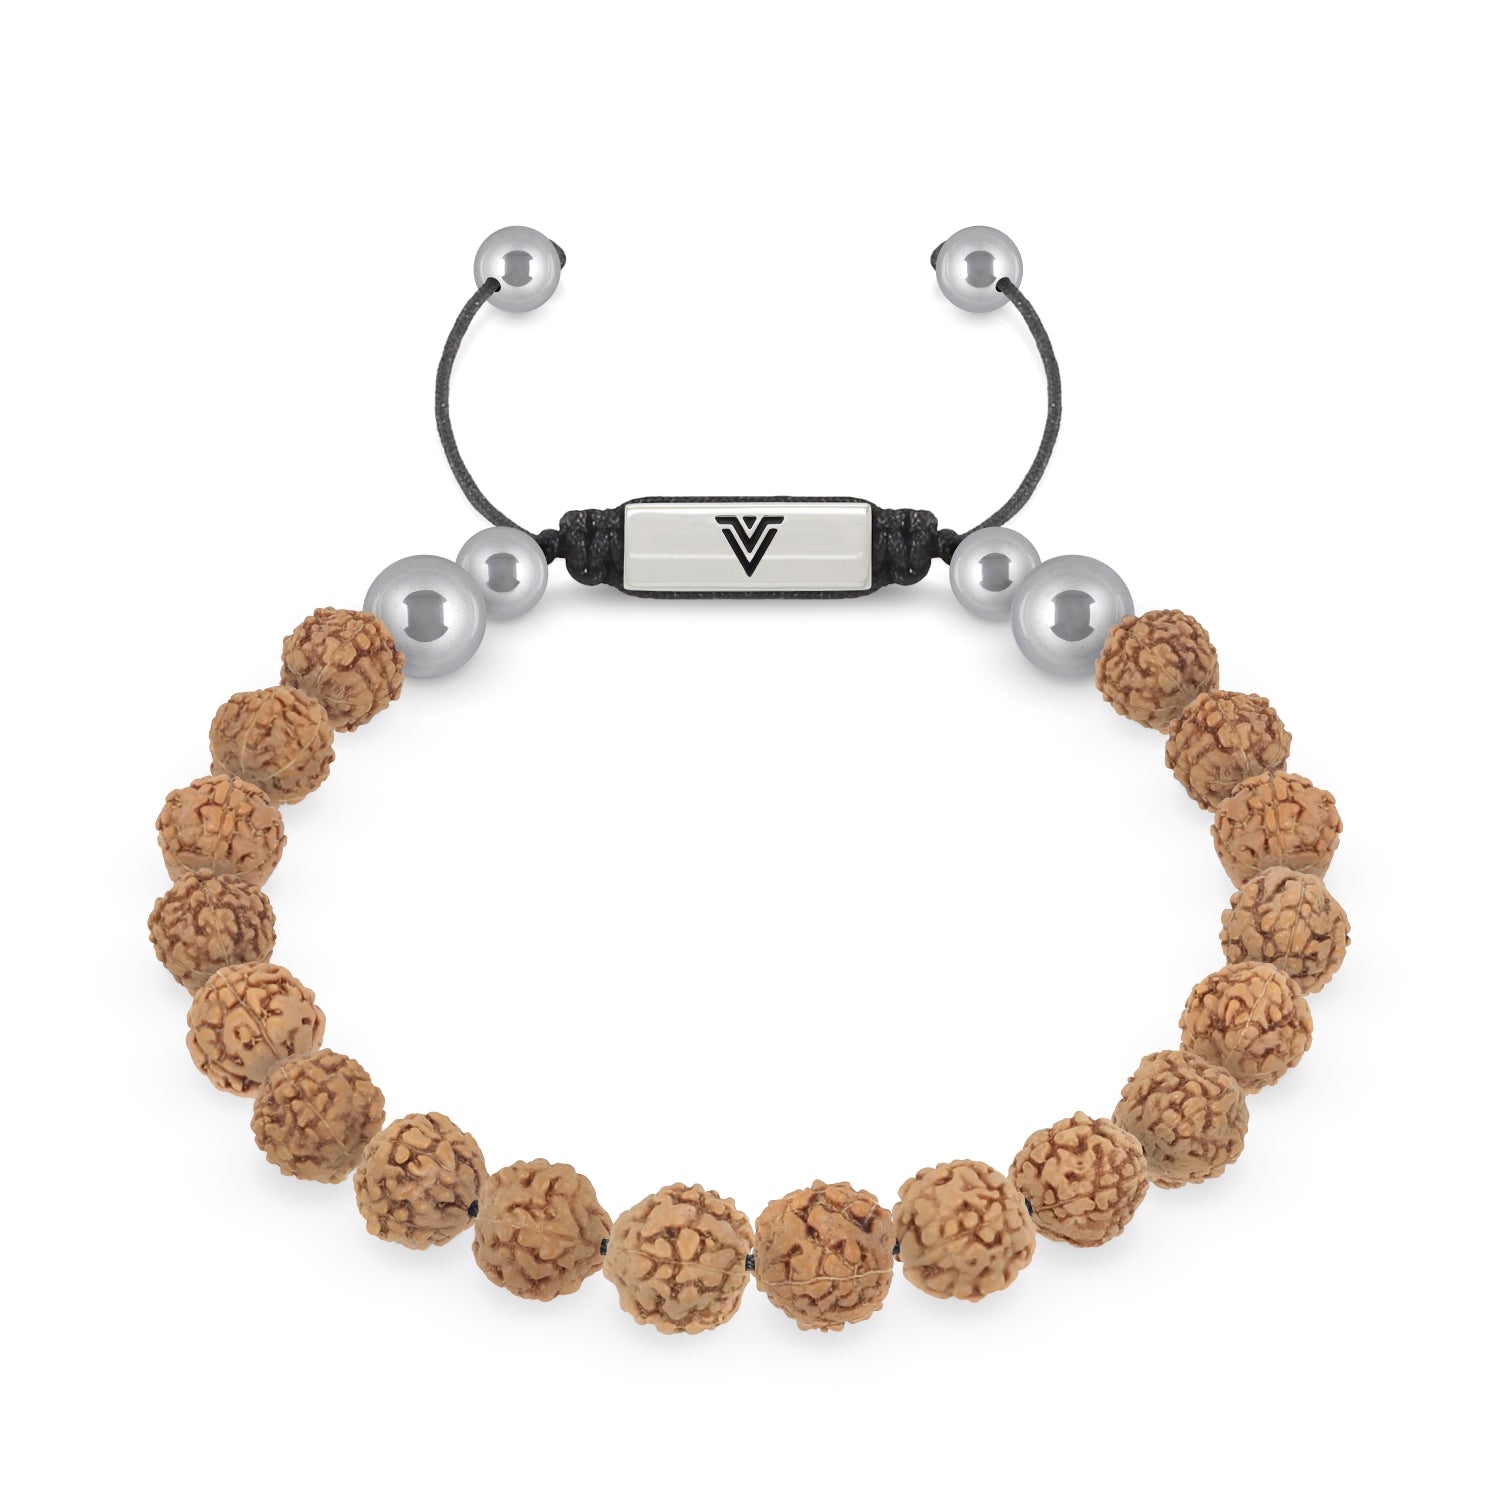 Front view of an 8mm Rudraksha beaded shamballa bracelet with silver stainless steel logo bead made by Voltlin